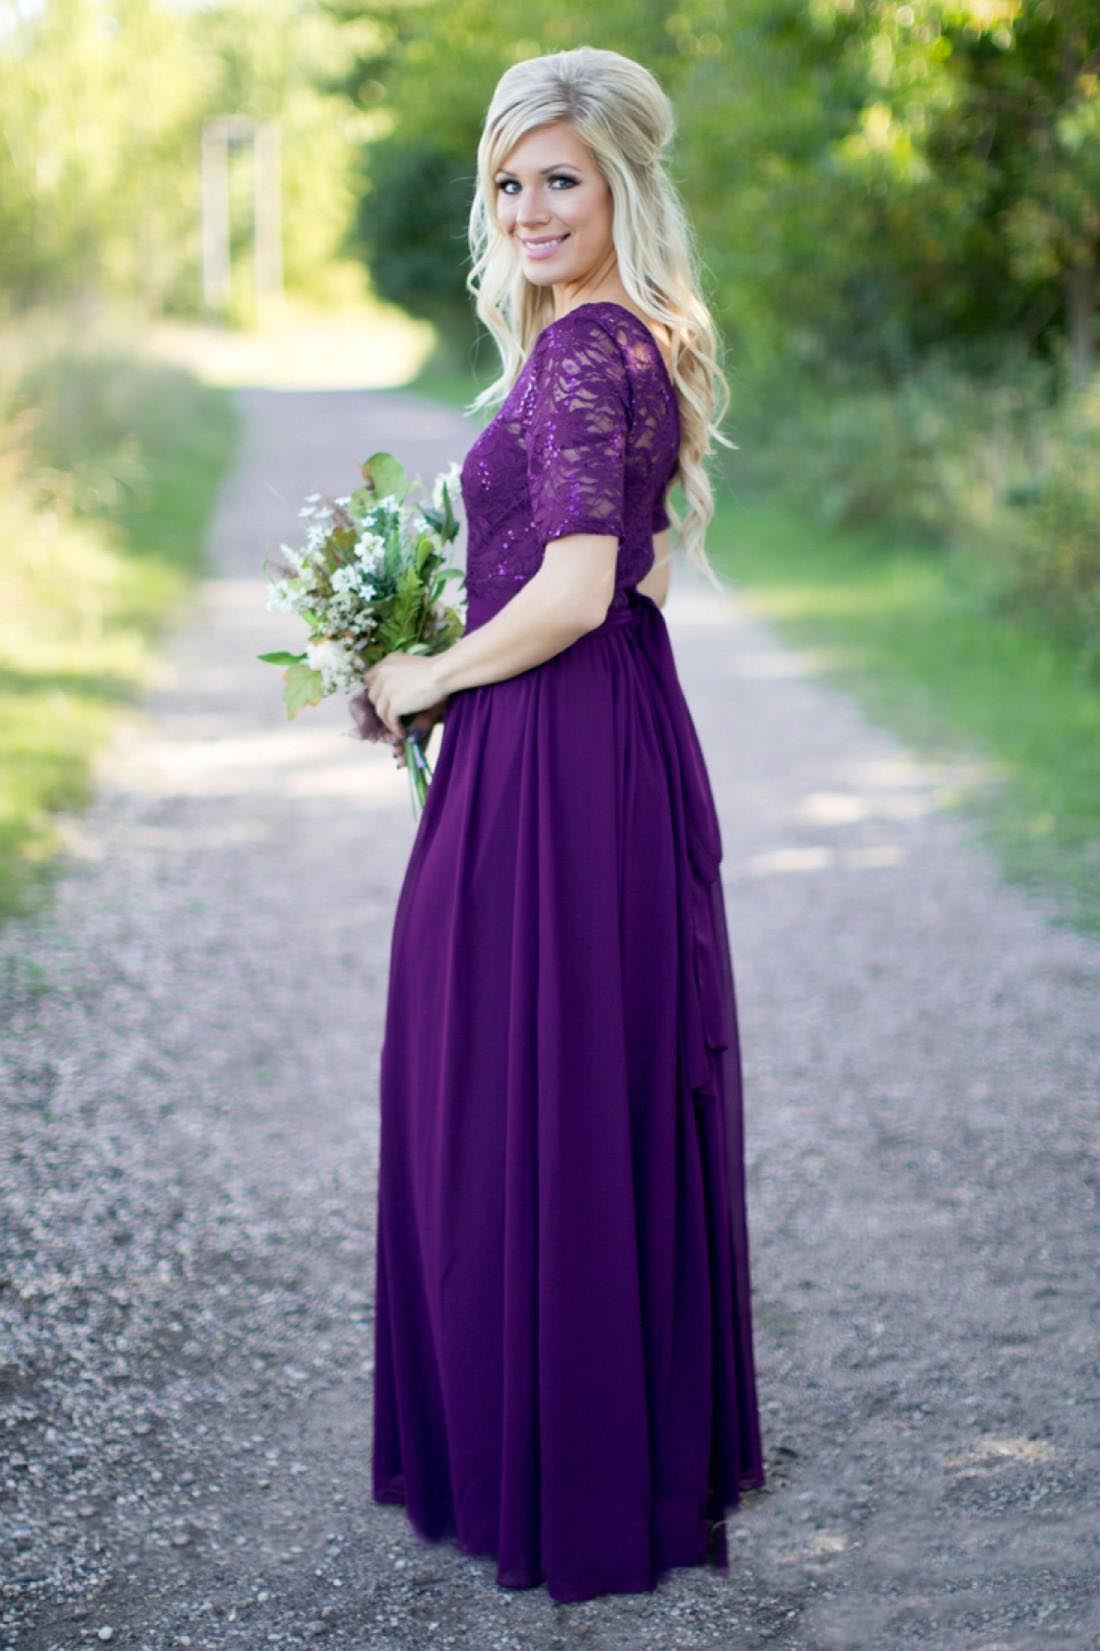 Purple Bridesmaid Dresses Vintage Lace with Short Sleeves Open Back Sash Chiffon Western Wedding Maid of Honor Dress Prom Evening Gowns